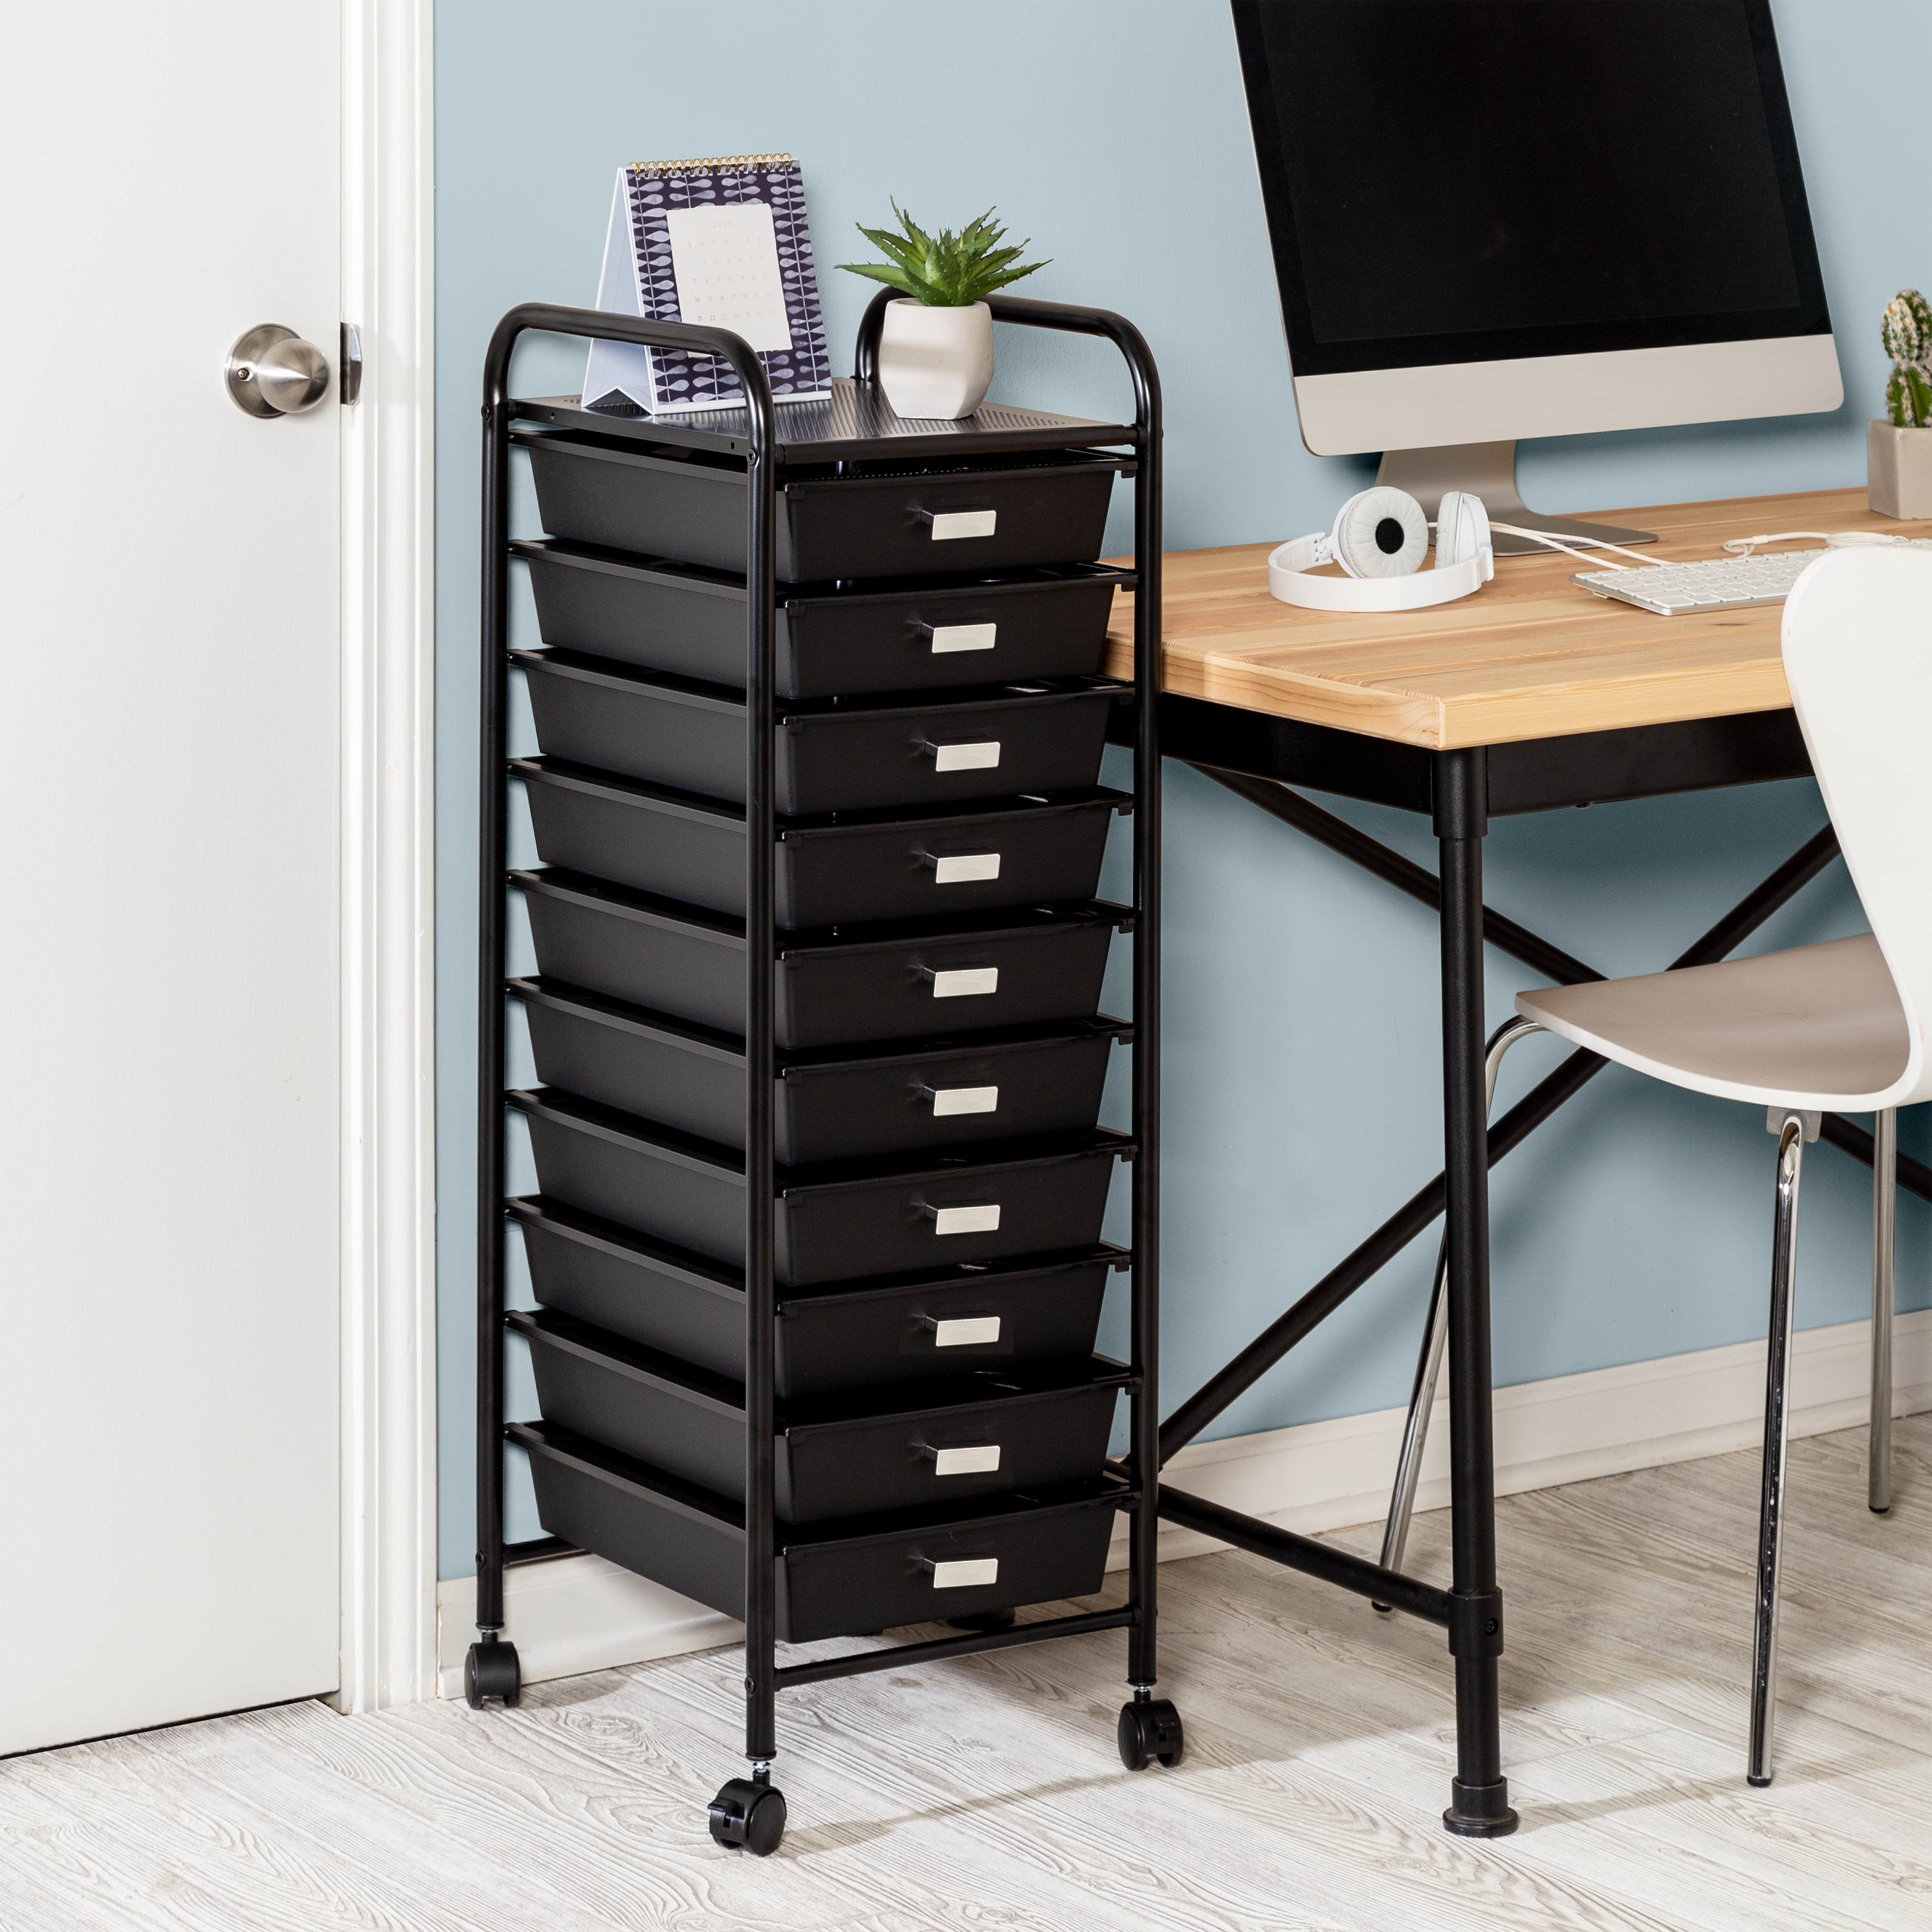 Honey-Can-Do Metal Frame Rolling Storage Cart with 10 Plastic Drawers, Black - image 3 of 9